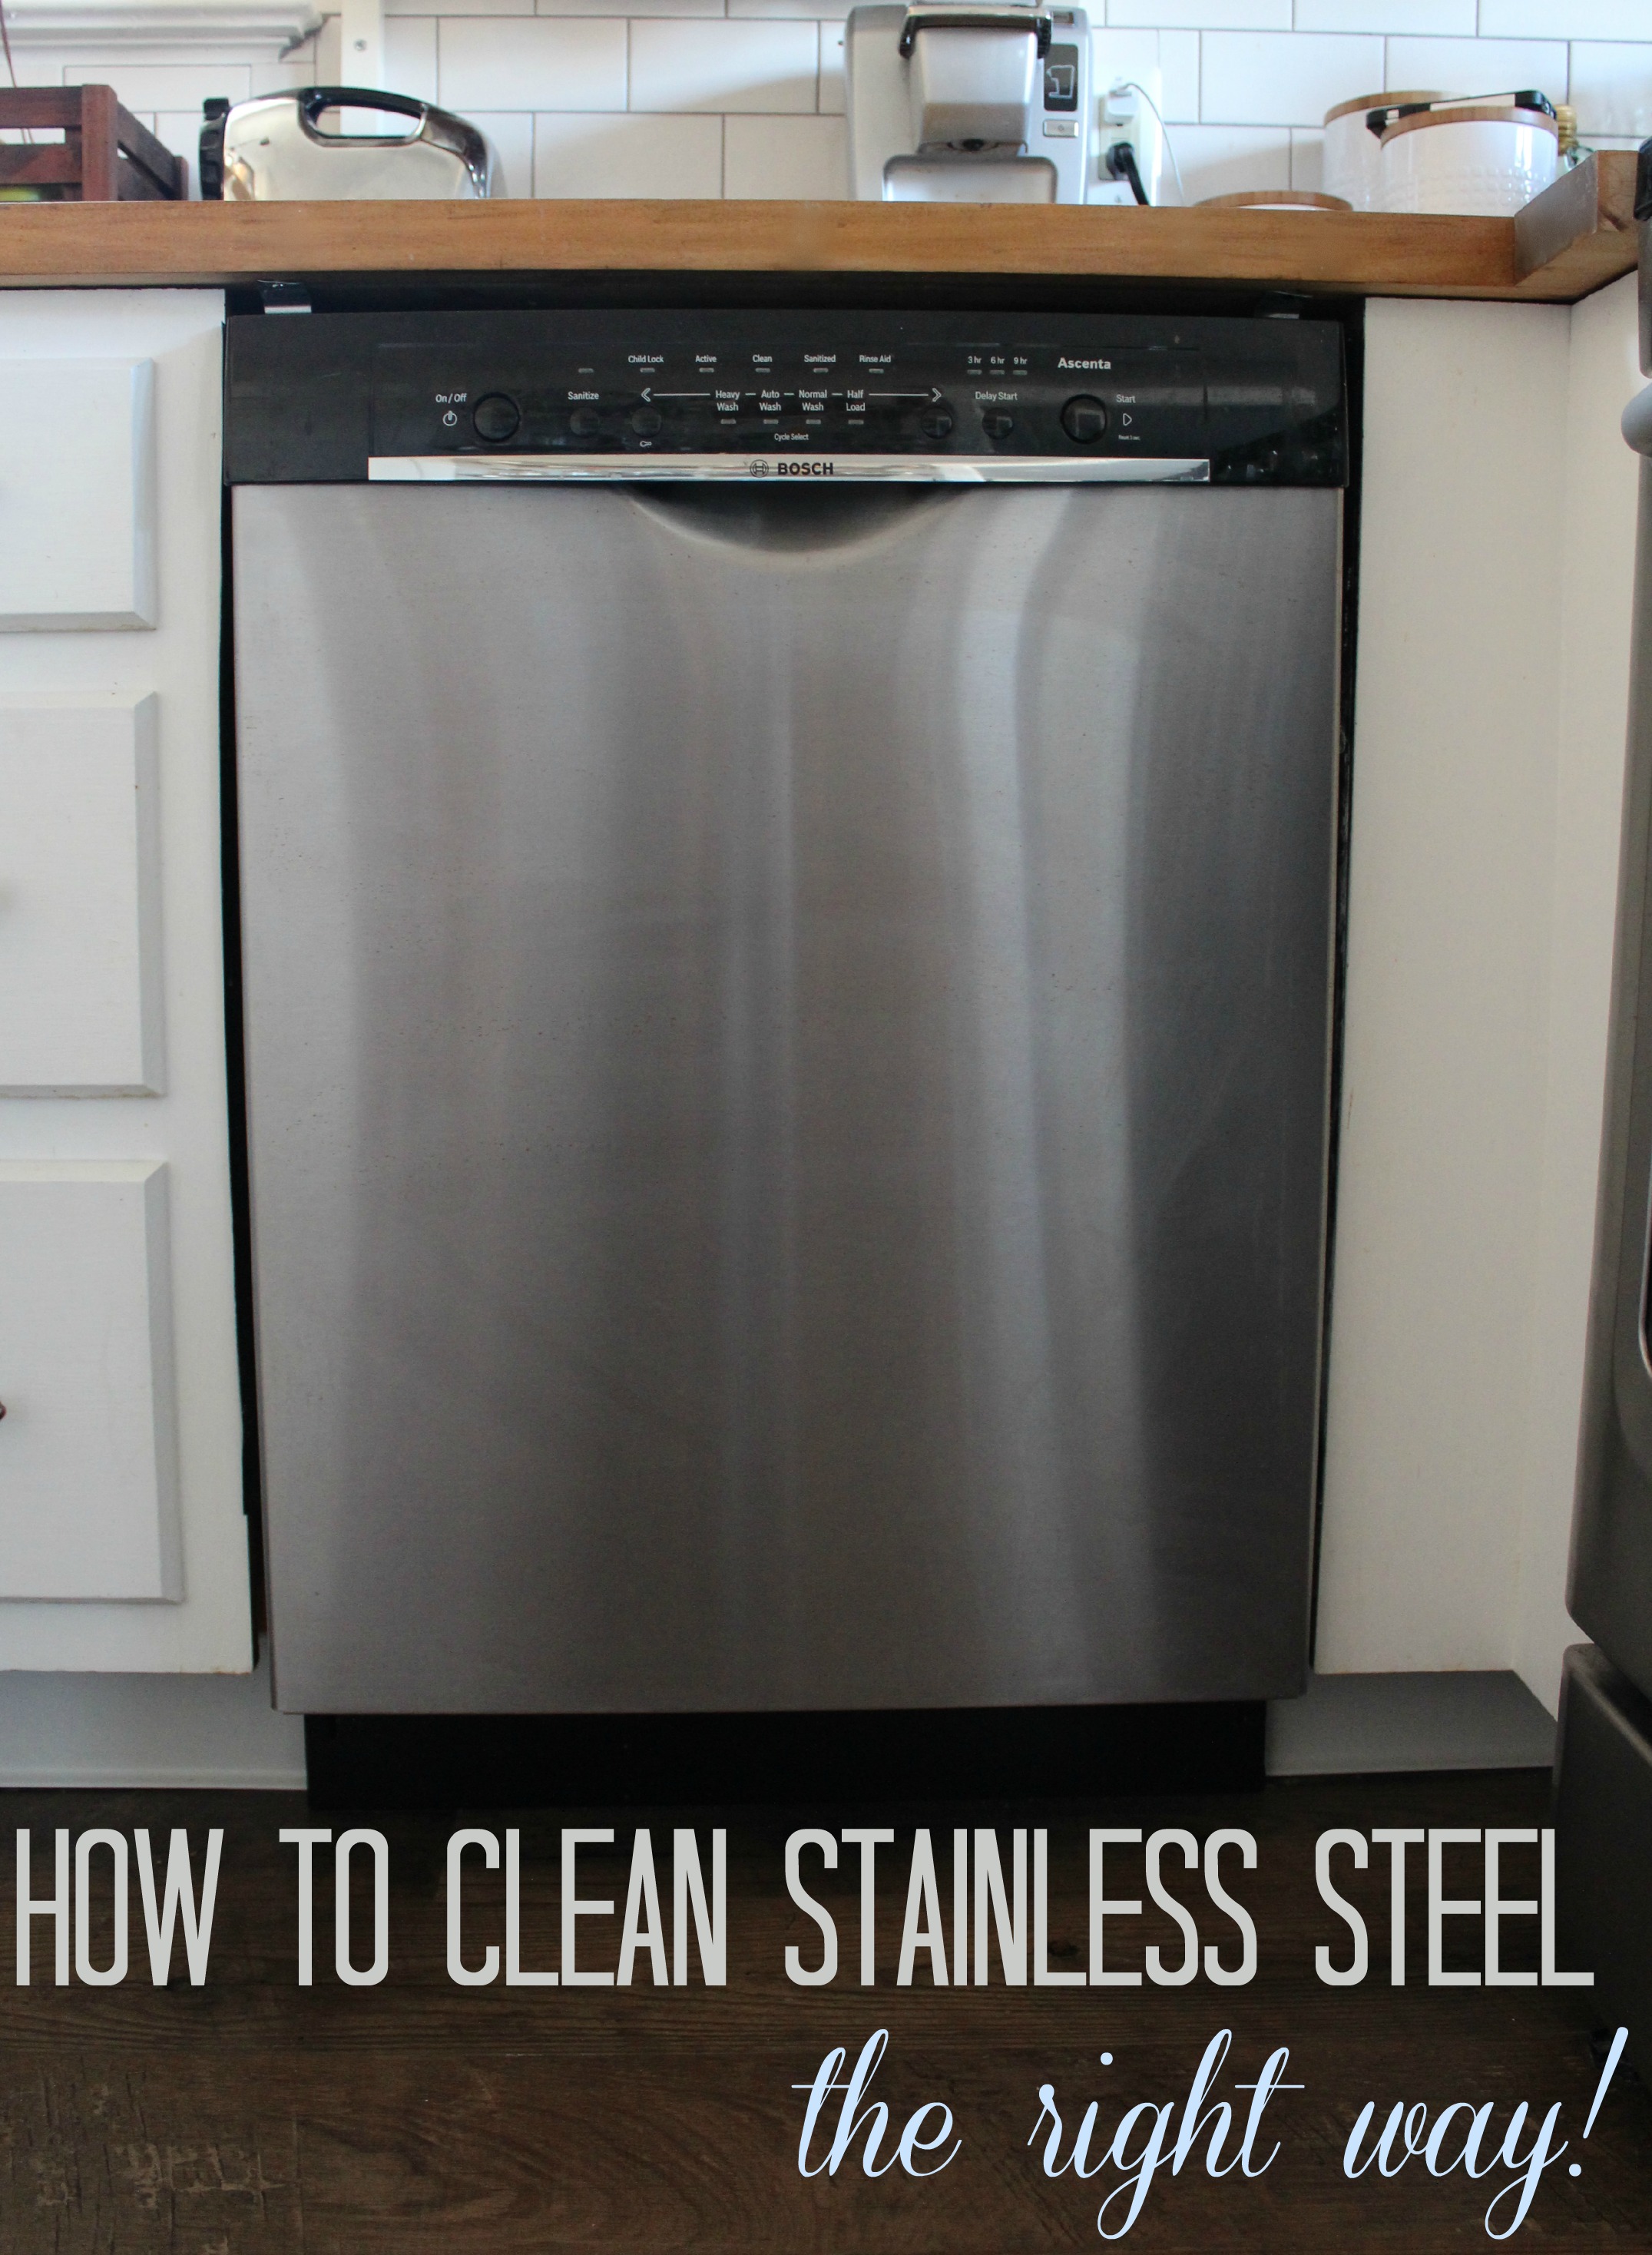 How to clean stainless steel the RIGHT way {and a giveaway!}